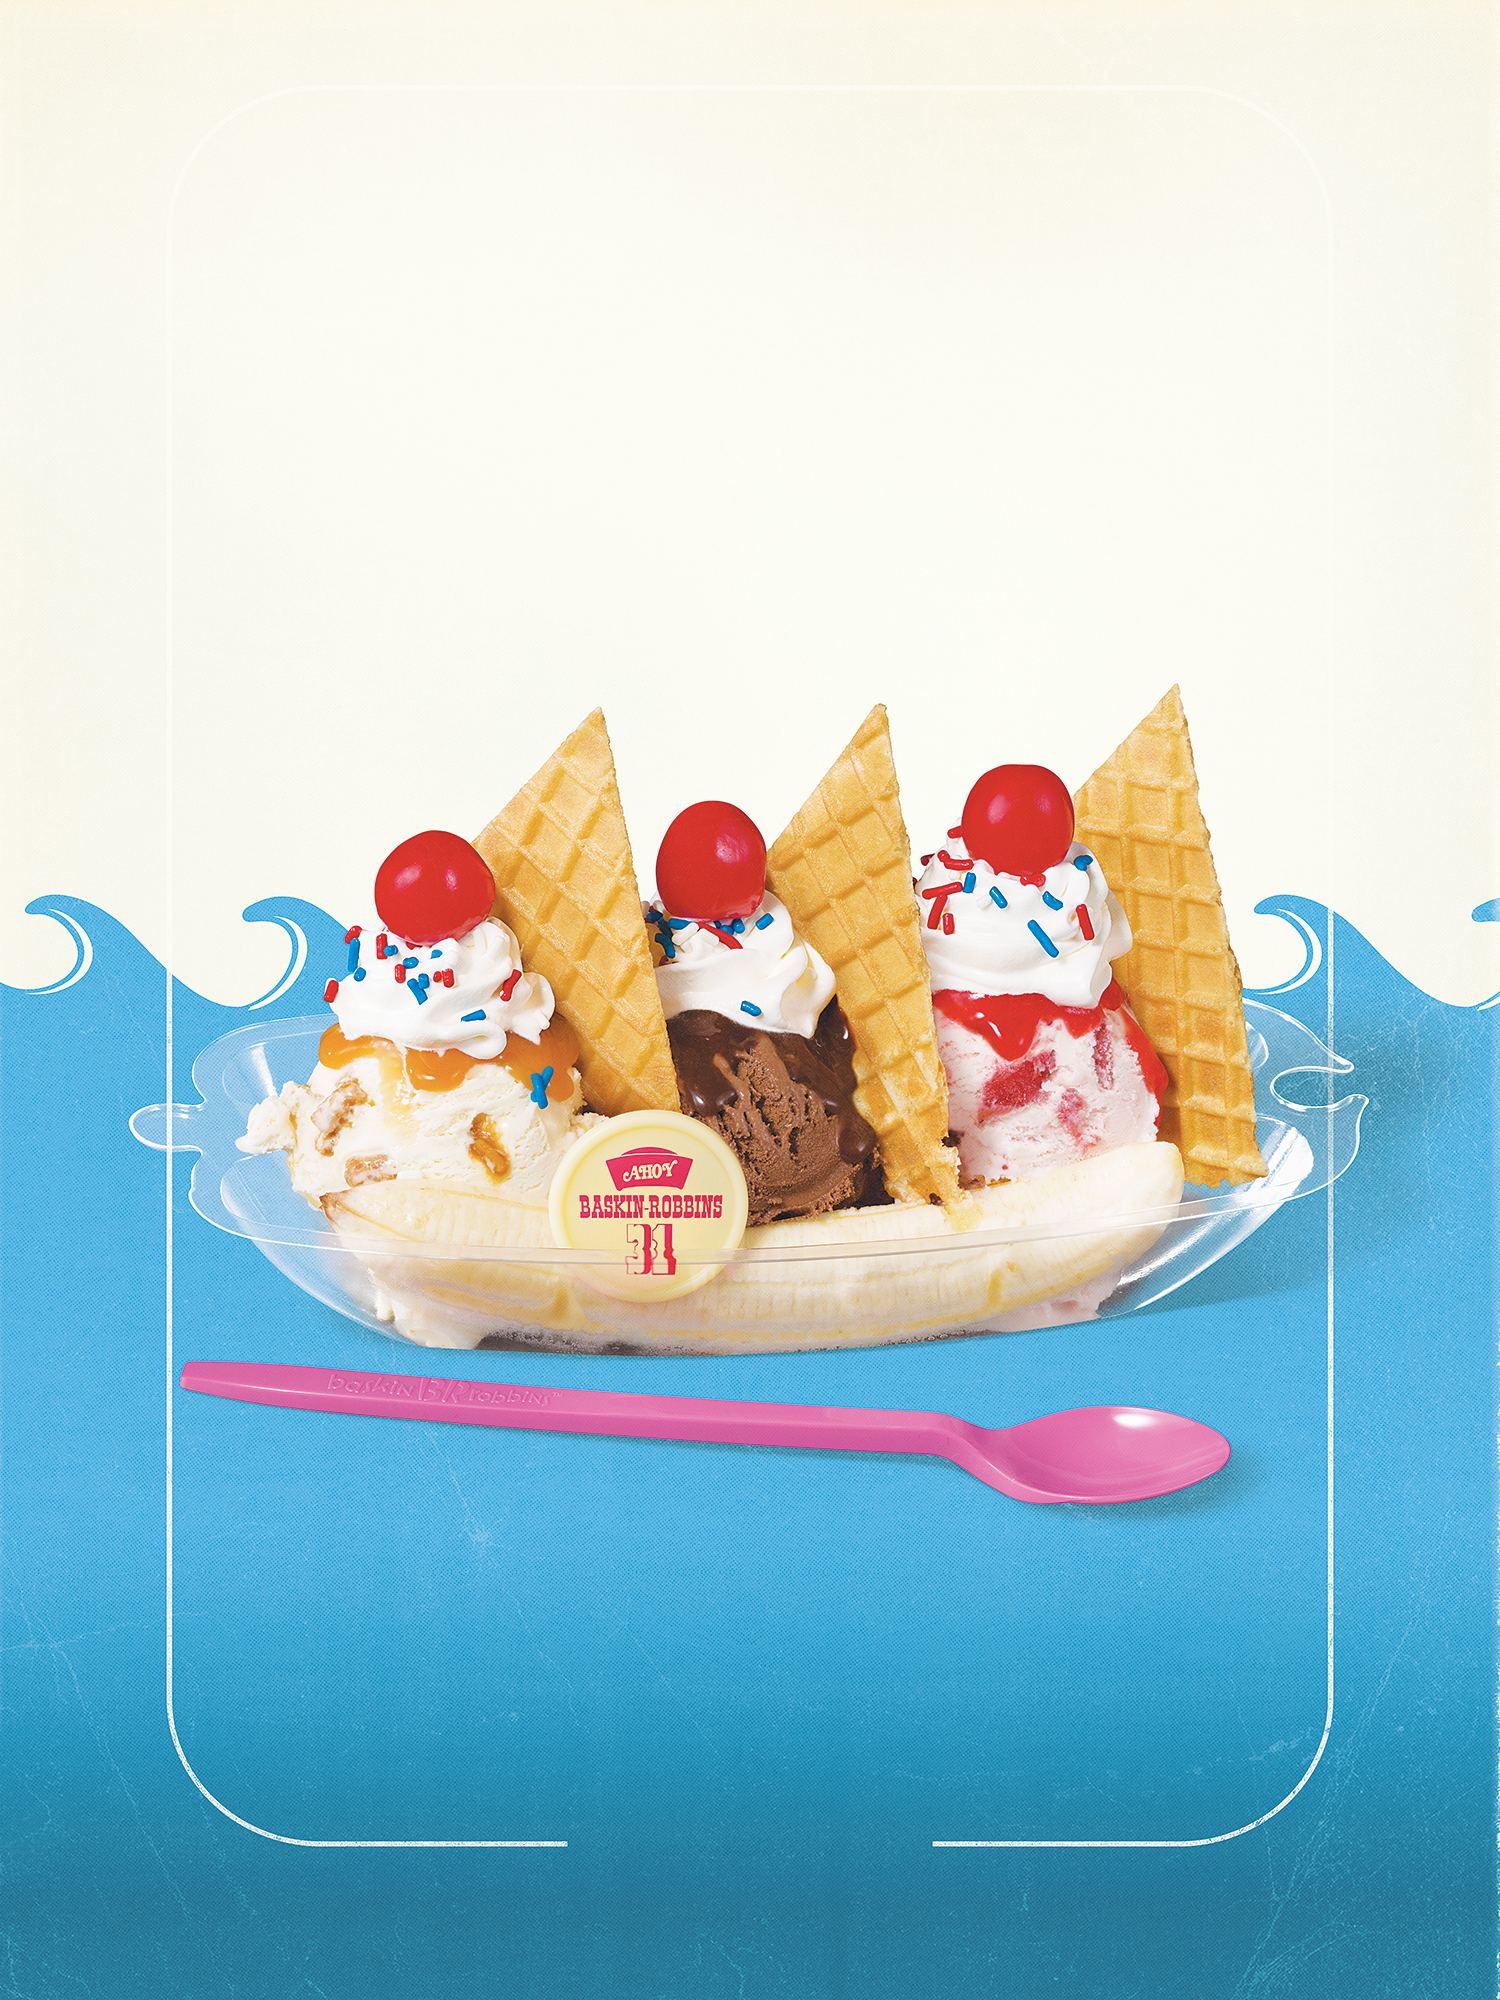 Stranger Things 3 Scoops Ahoy USS Butterscotch Sundae